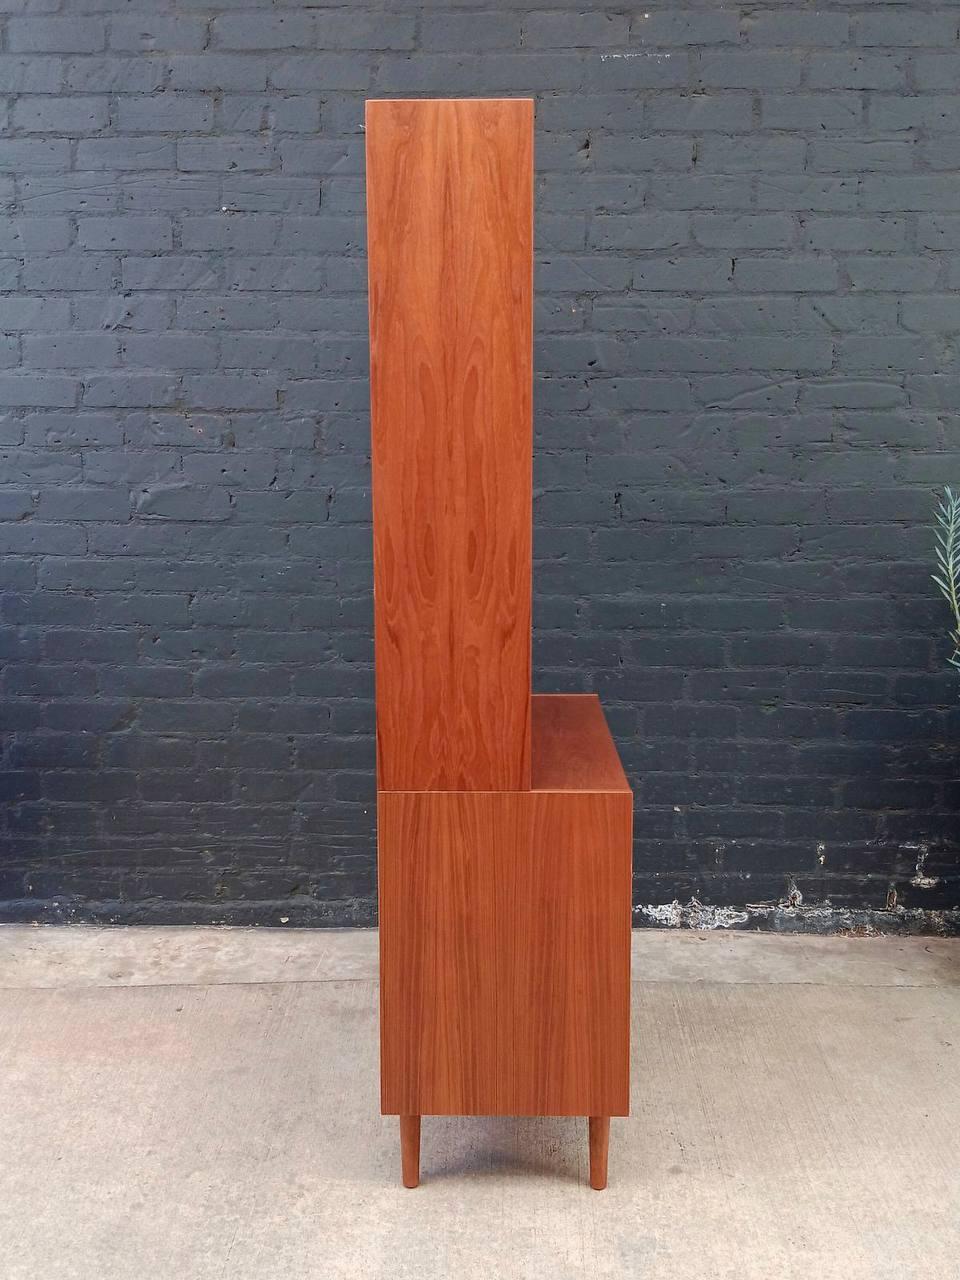 Newly Refinished - Mid-Century Danish Modern Teak Bookshelf Dresser In Excellent Condition For Sale In Los Angeles, CA